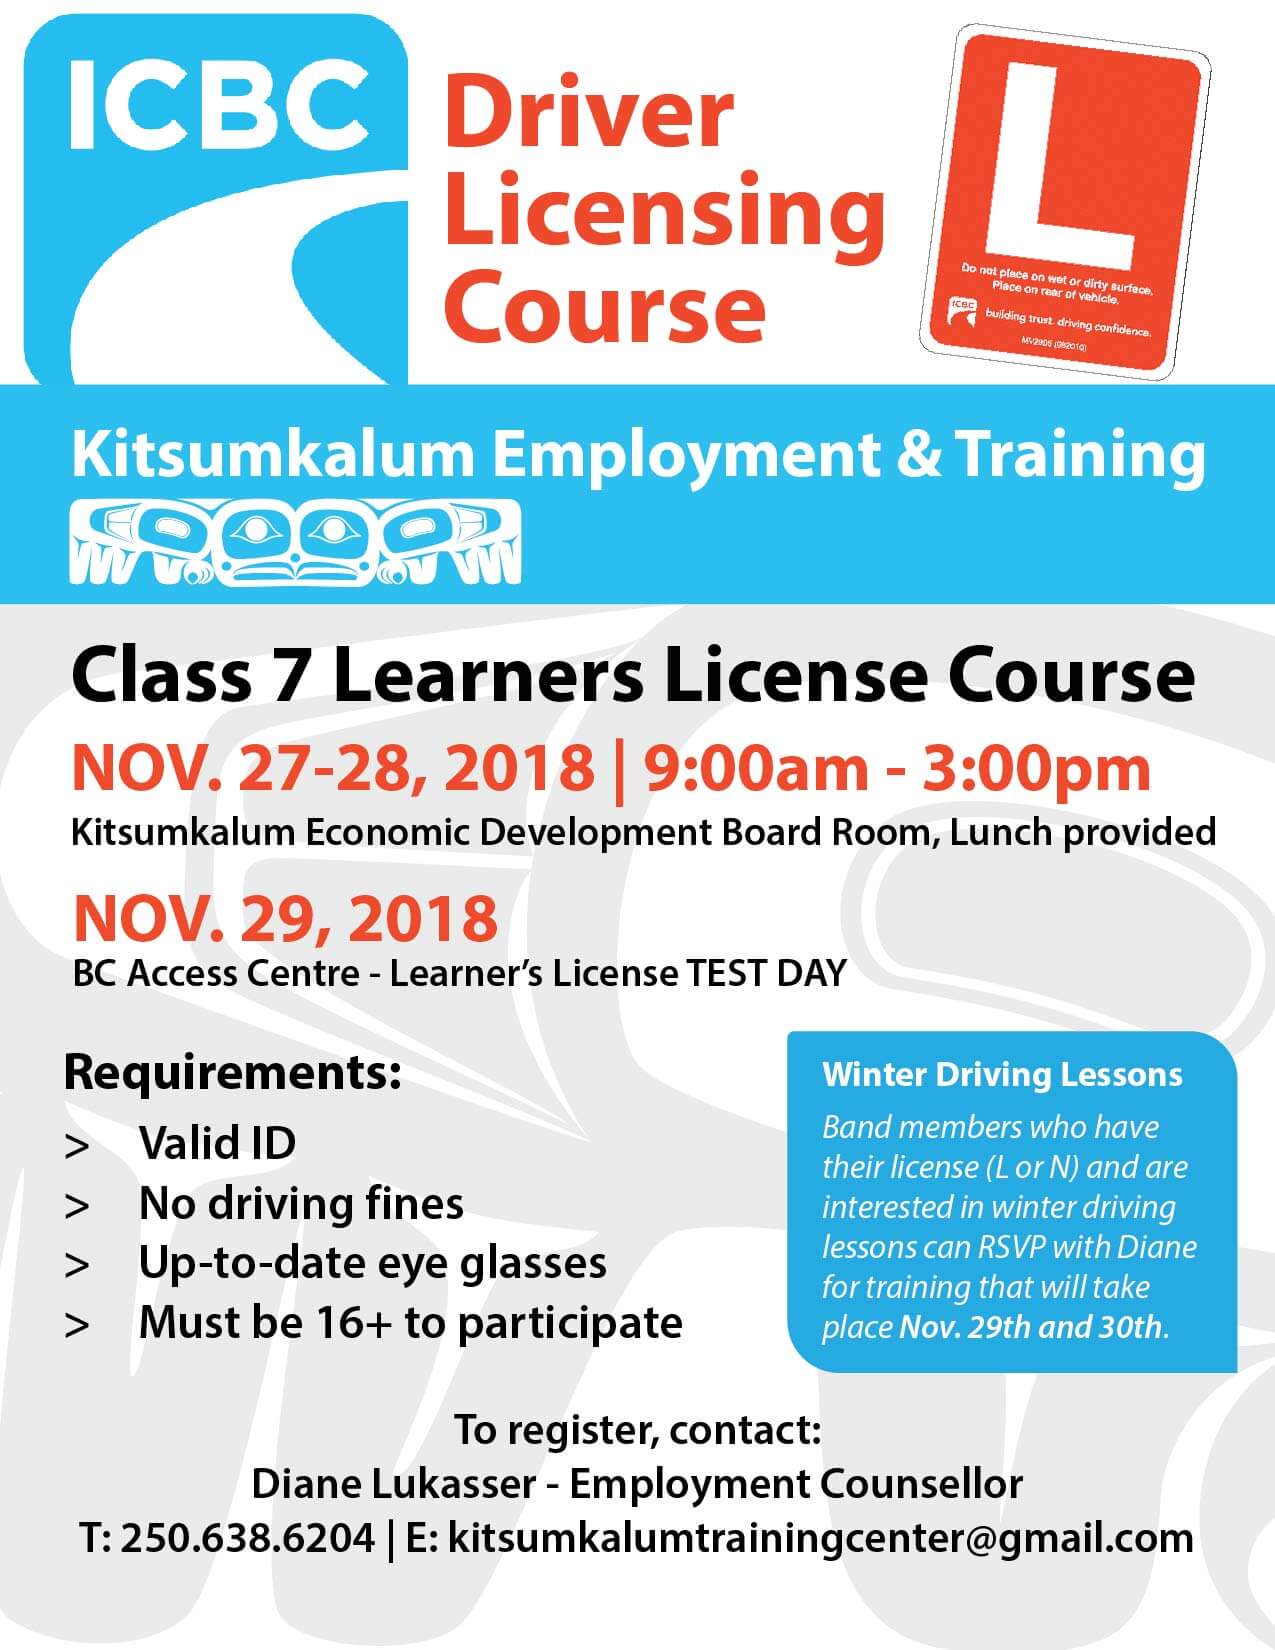 Obtain Your Learners License this November